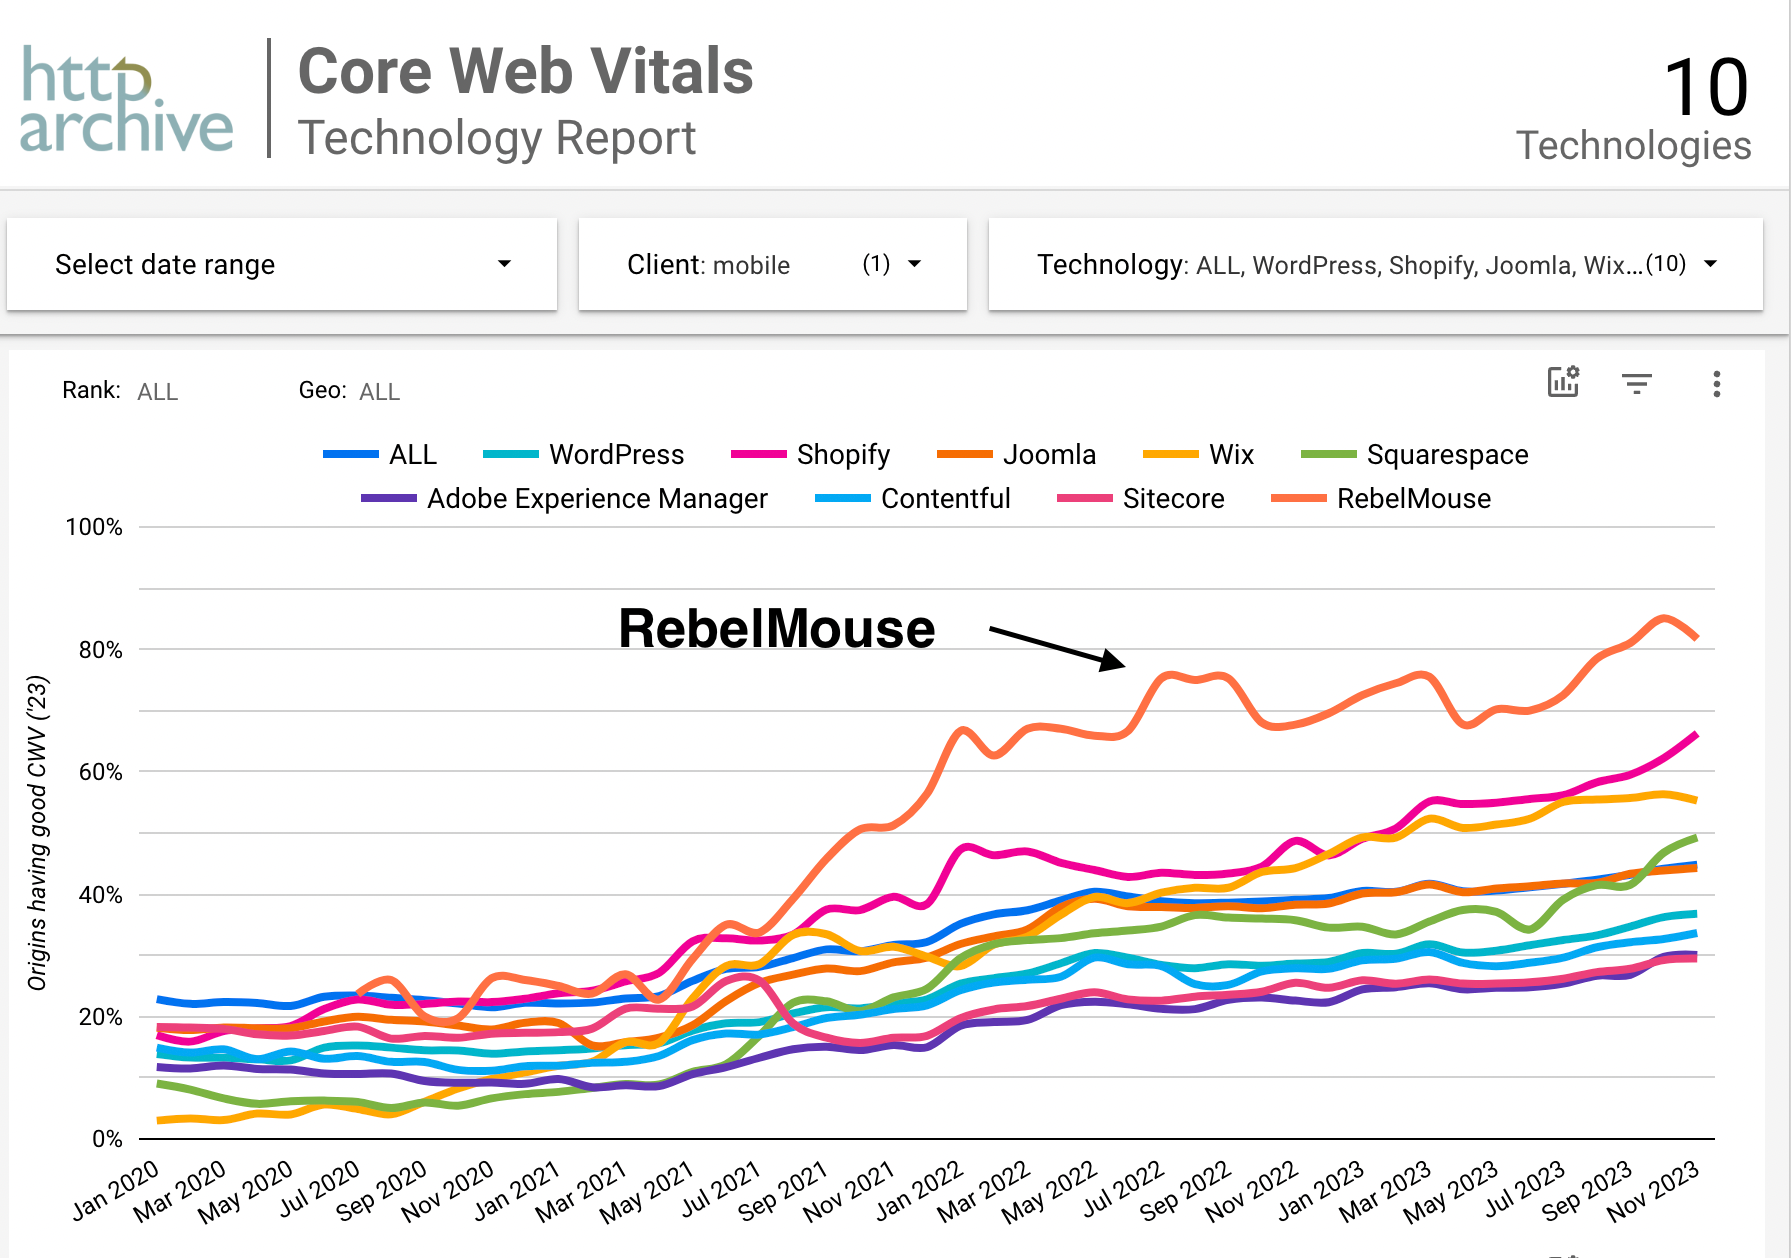 RebelMouse tracks better performance on Google's Core Web Vitals than major competition